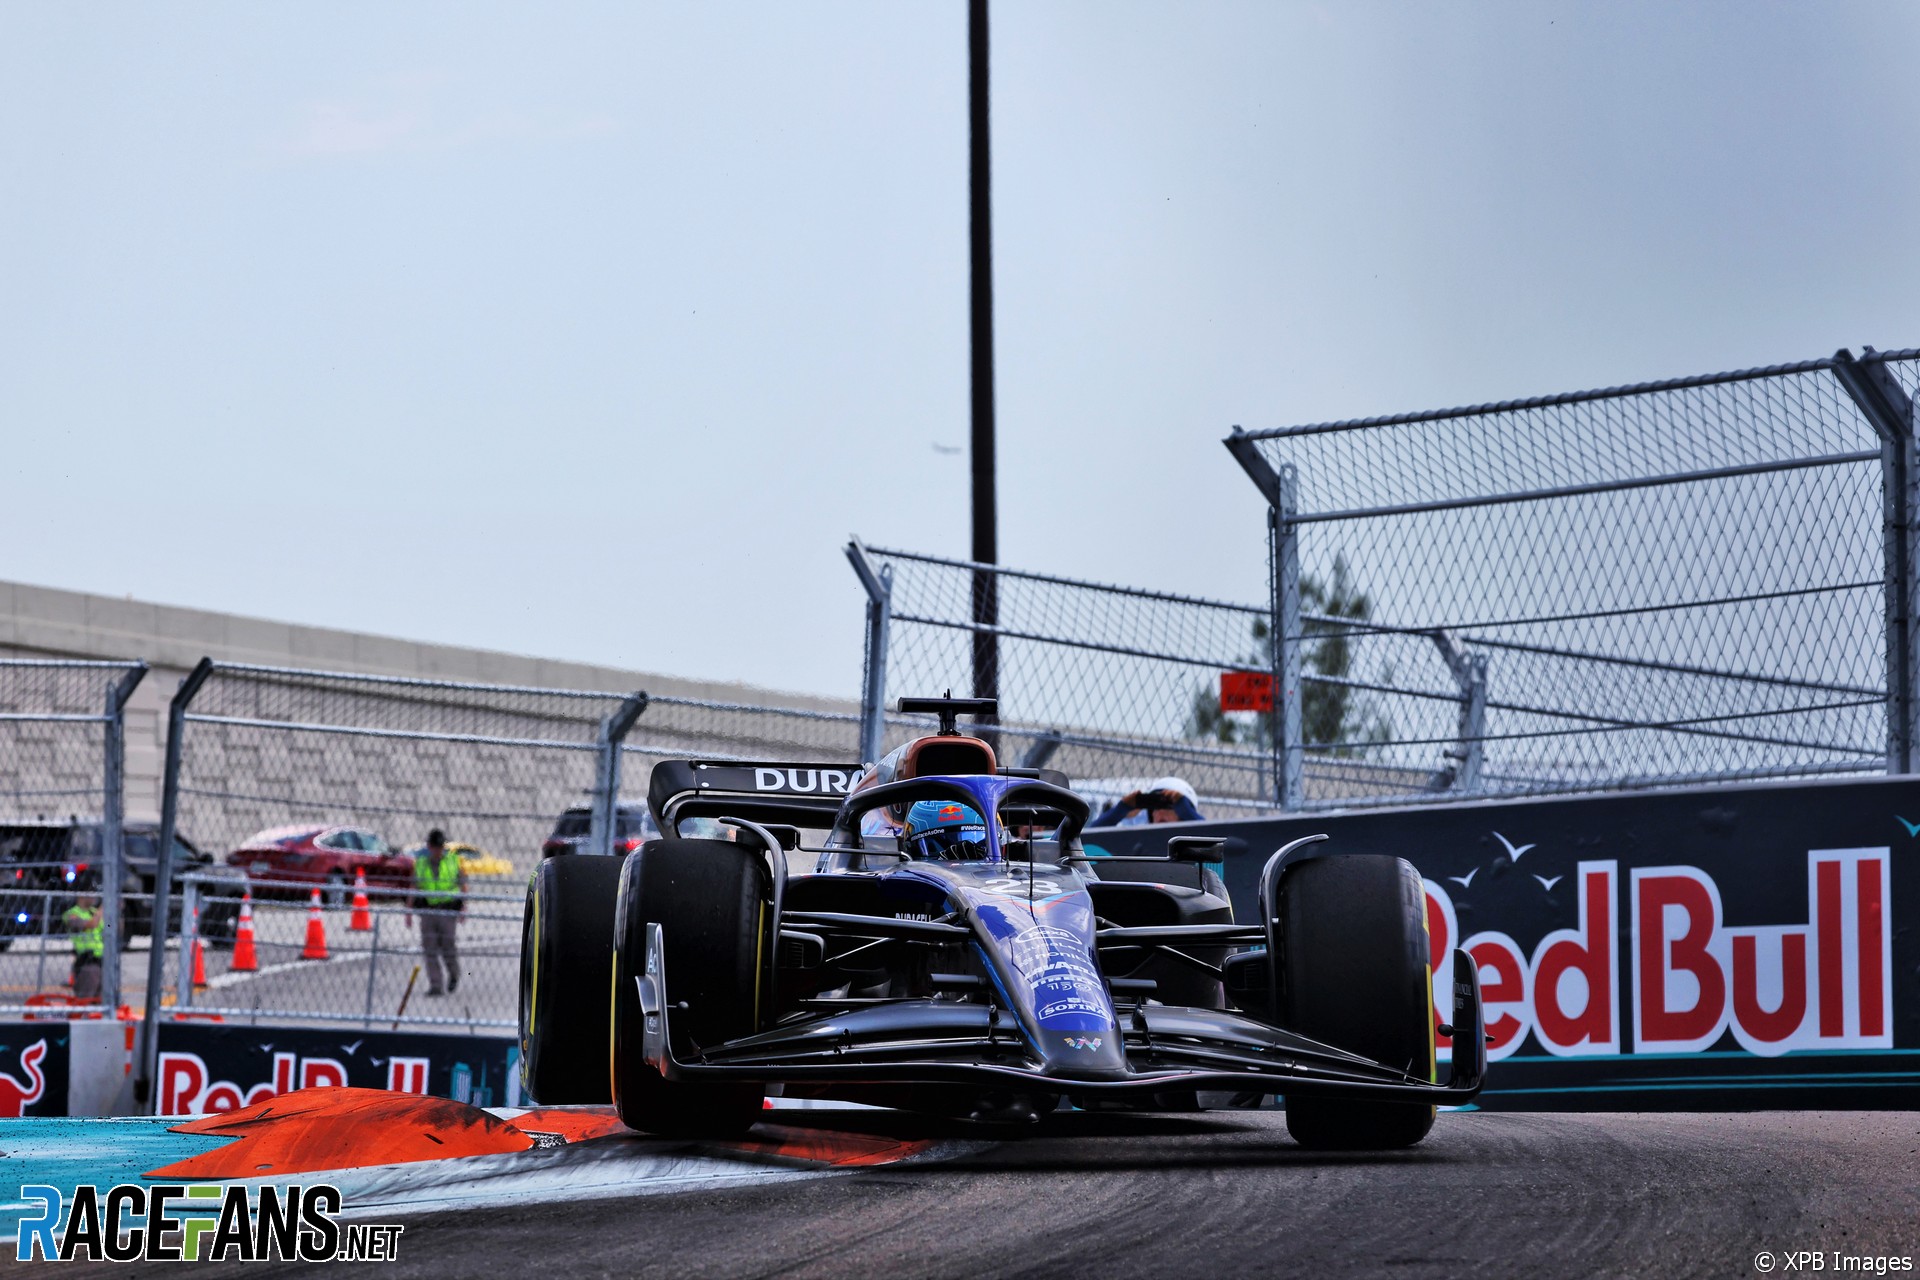 Strategy, not luck, earned Williams’ points finishes – Albon | RaceFans Round-up